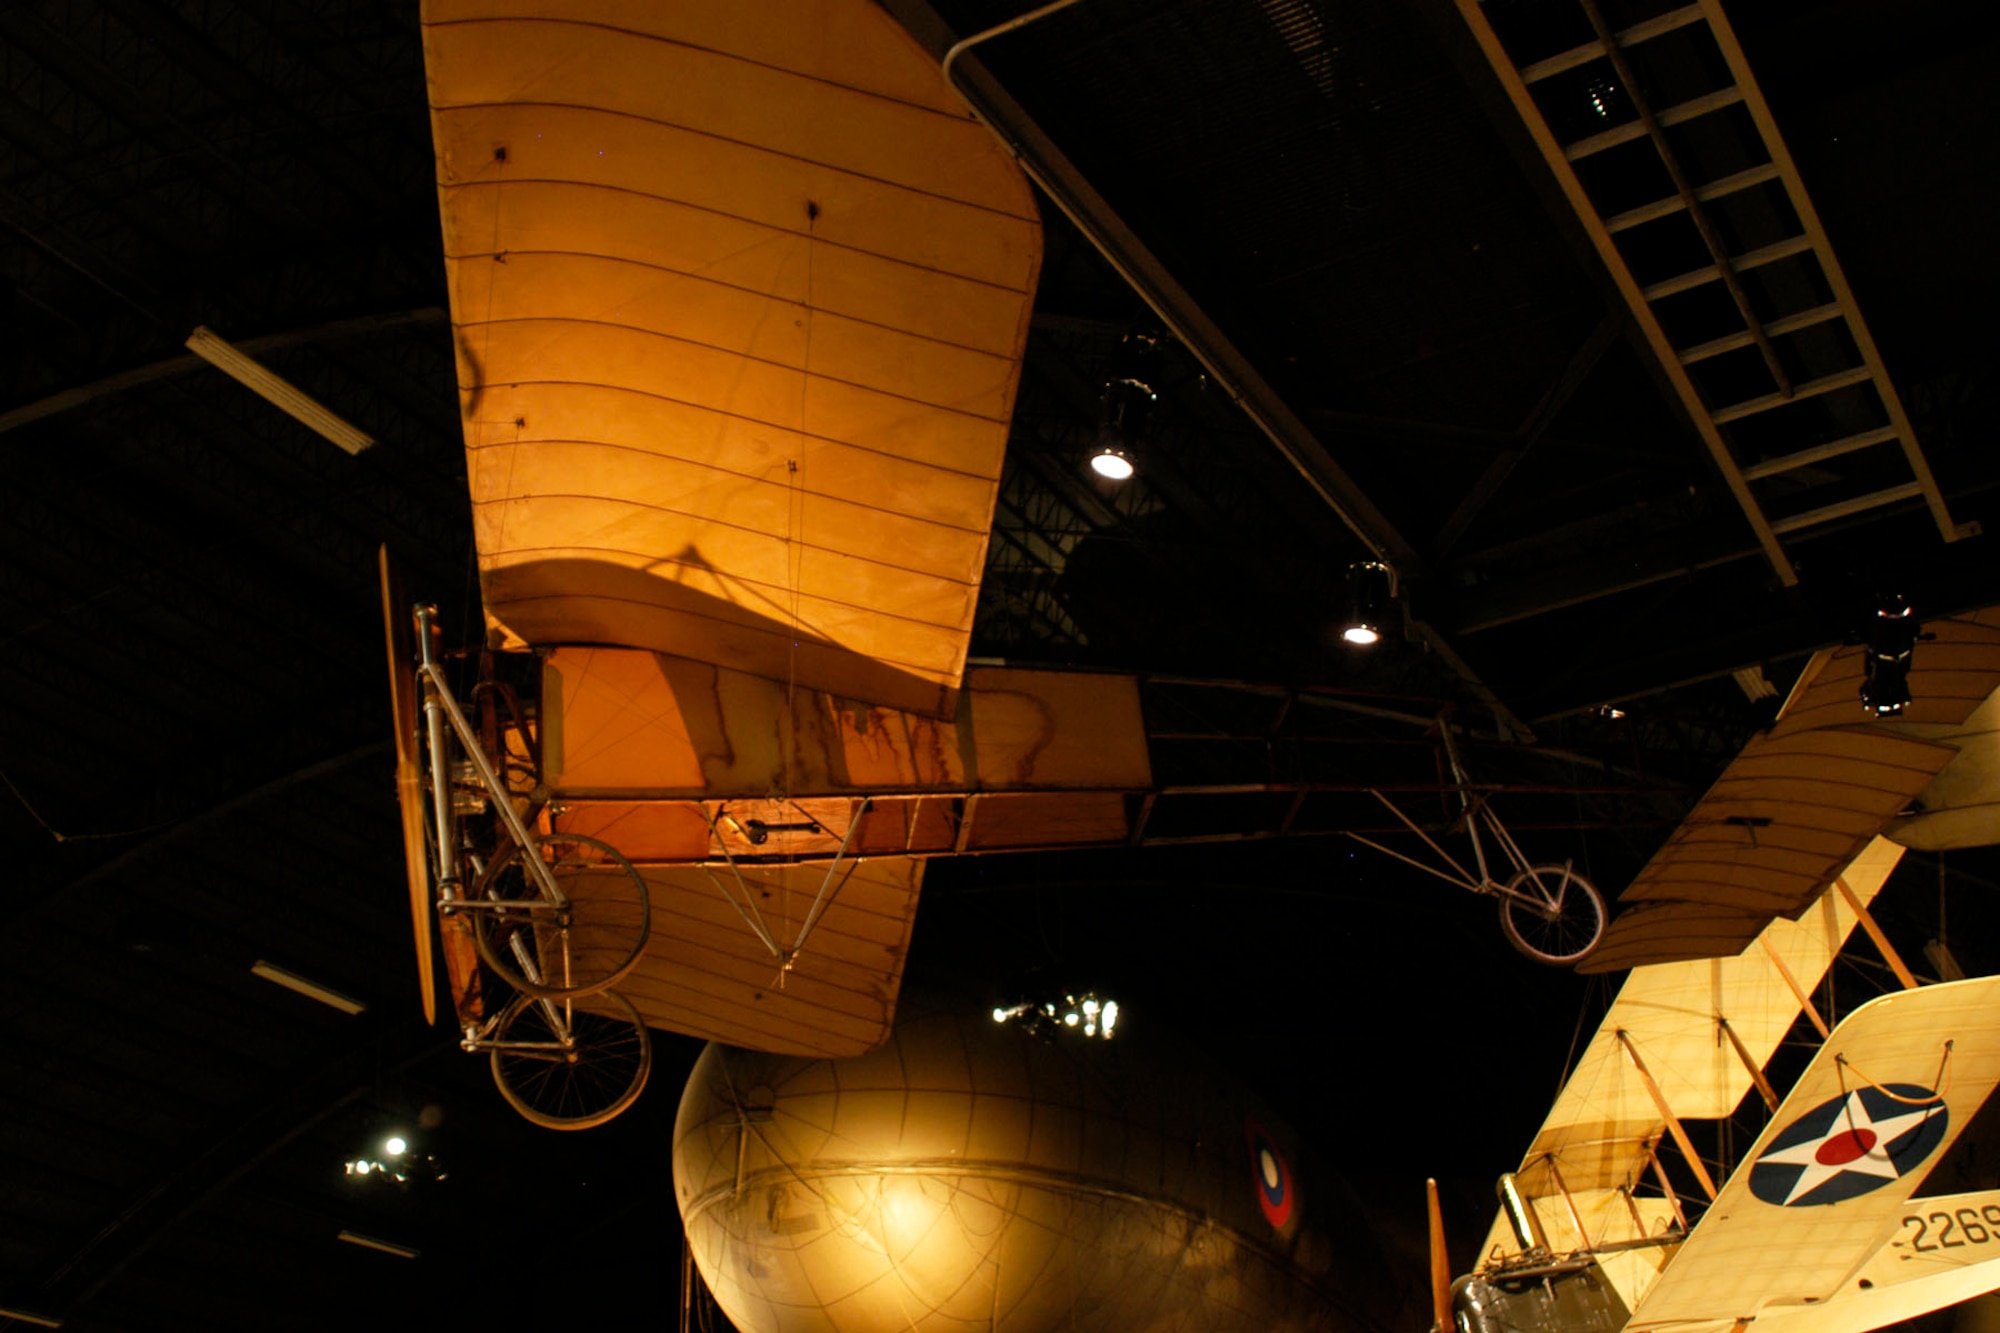 DAYTON, Ohio -- Bleriot Monoplane in the Early Years Gallery at the National Museum of the United States Air Force. (U.S. Air Force photo) 